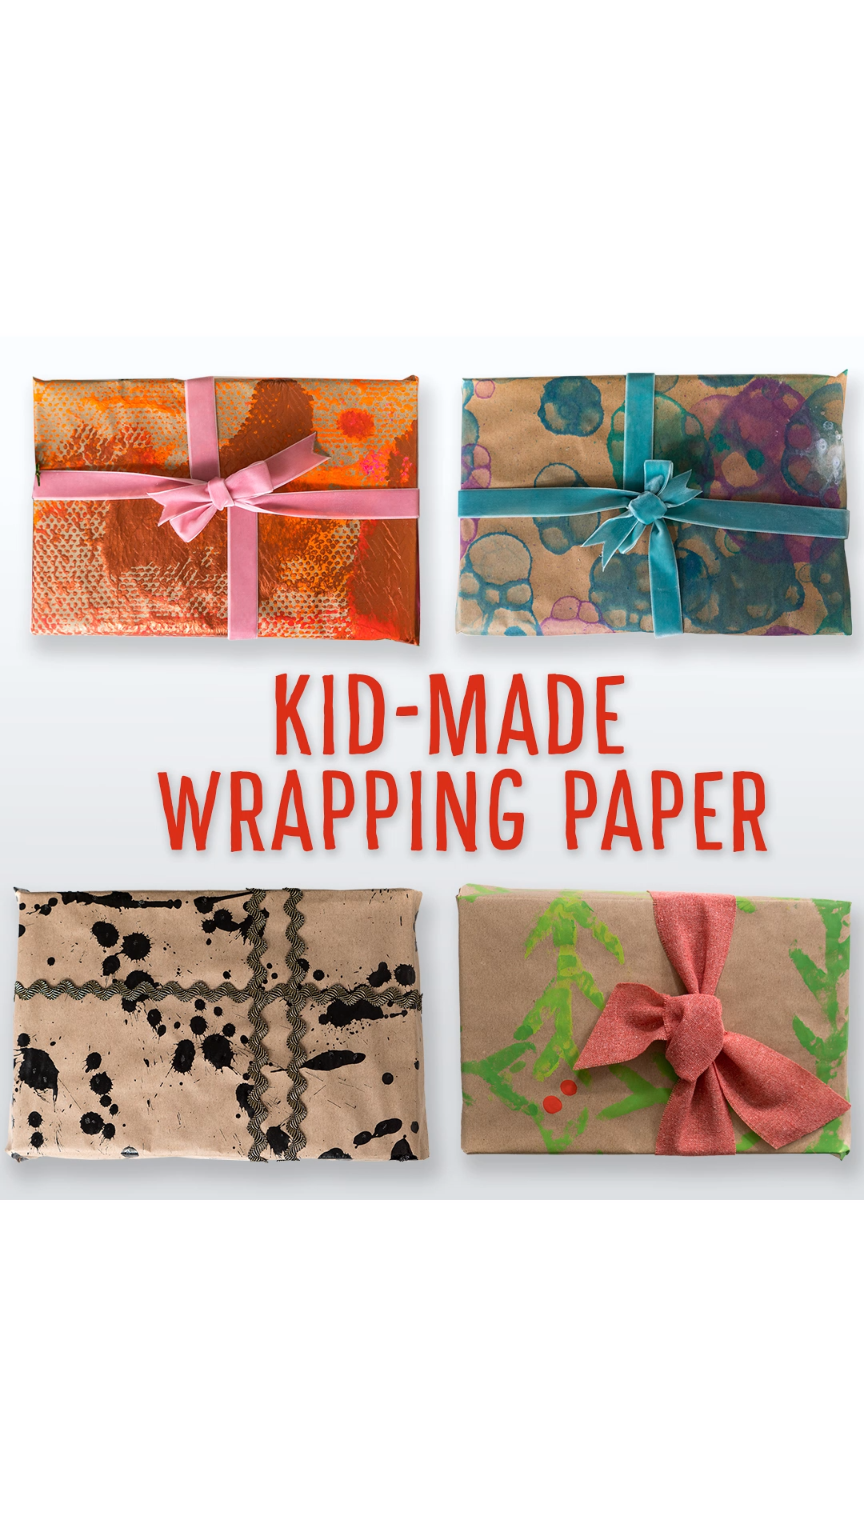 Kid-Made Wrapping Paper -   20 diy projects Videos paper
 ideas